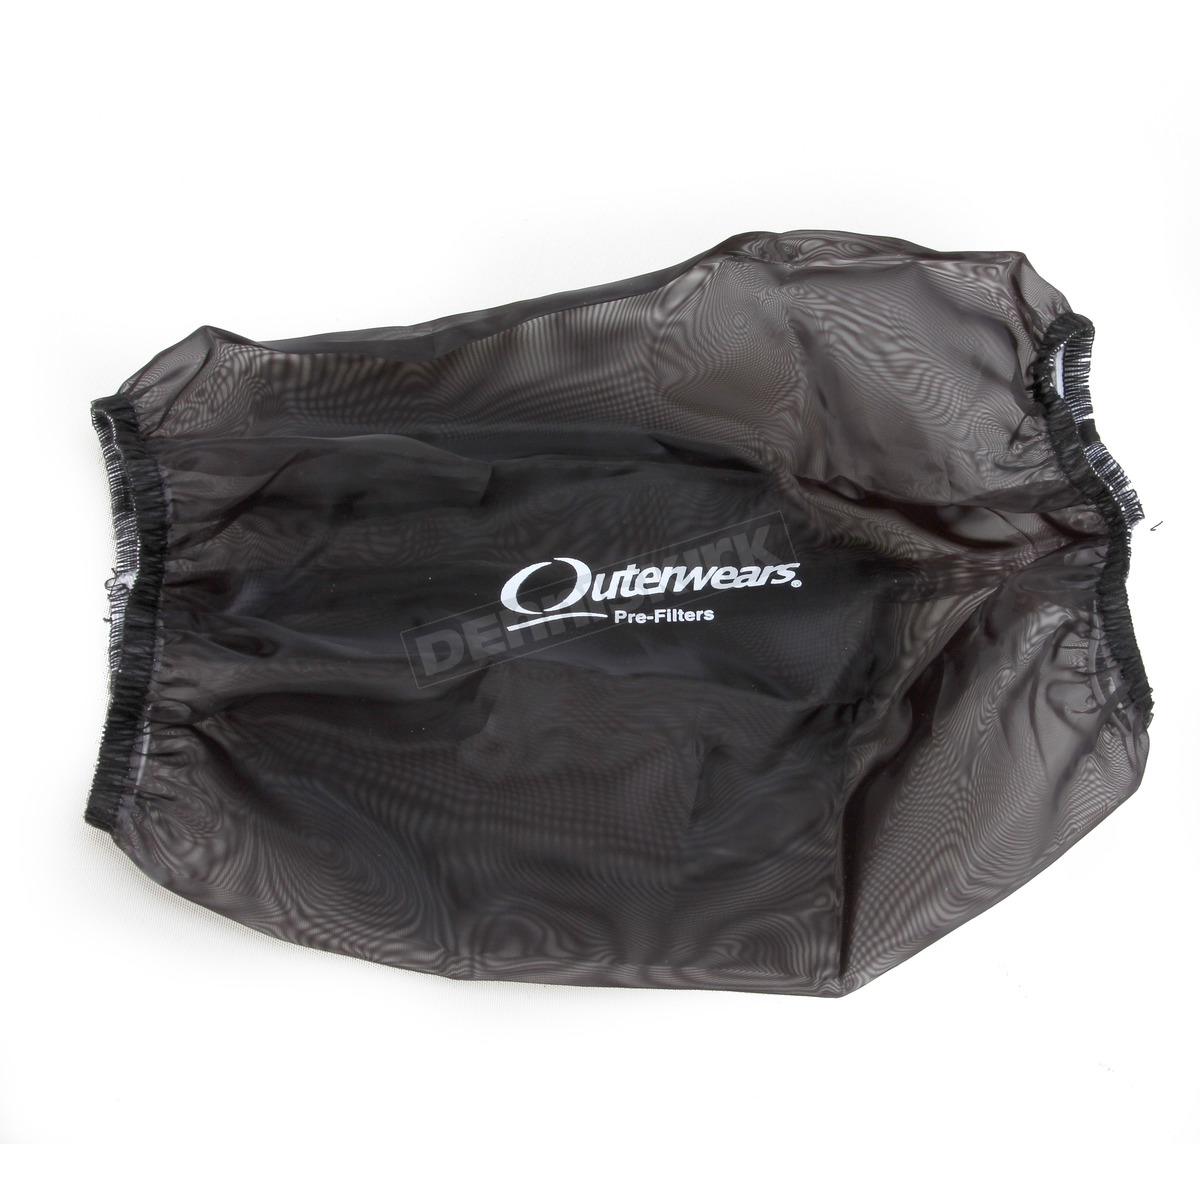 Outerwears Water Repellent Pre-Filter20-2851-01